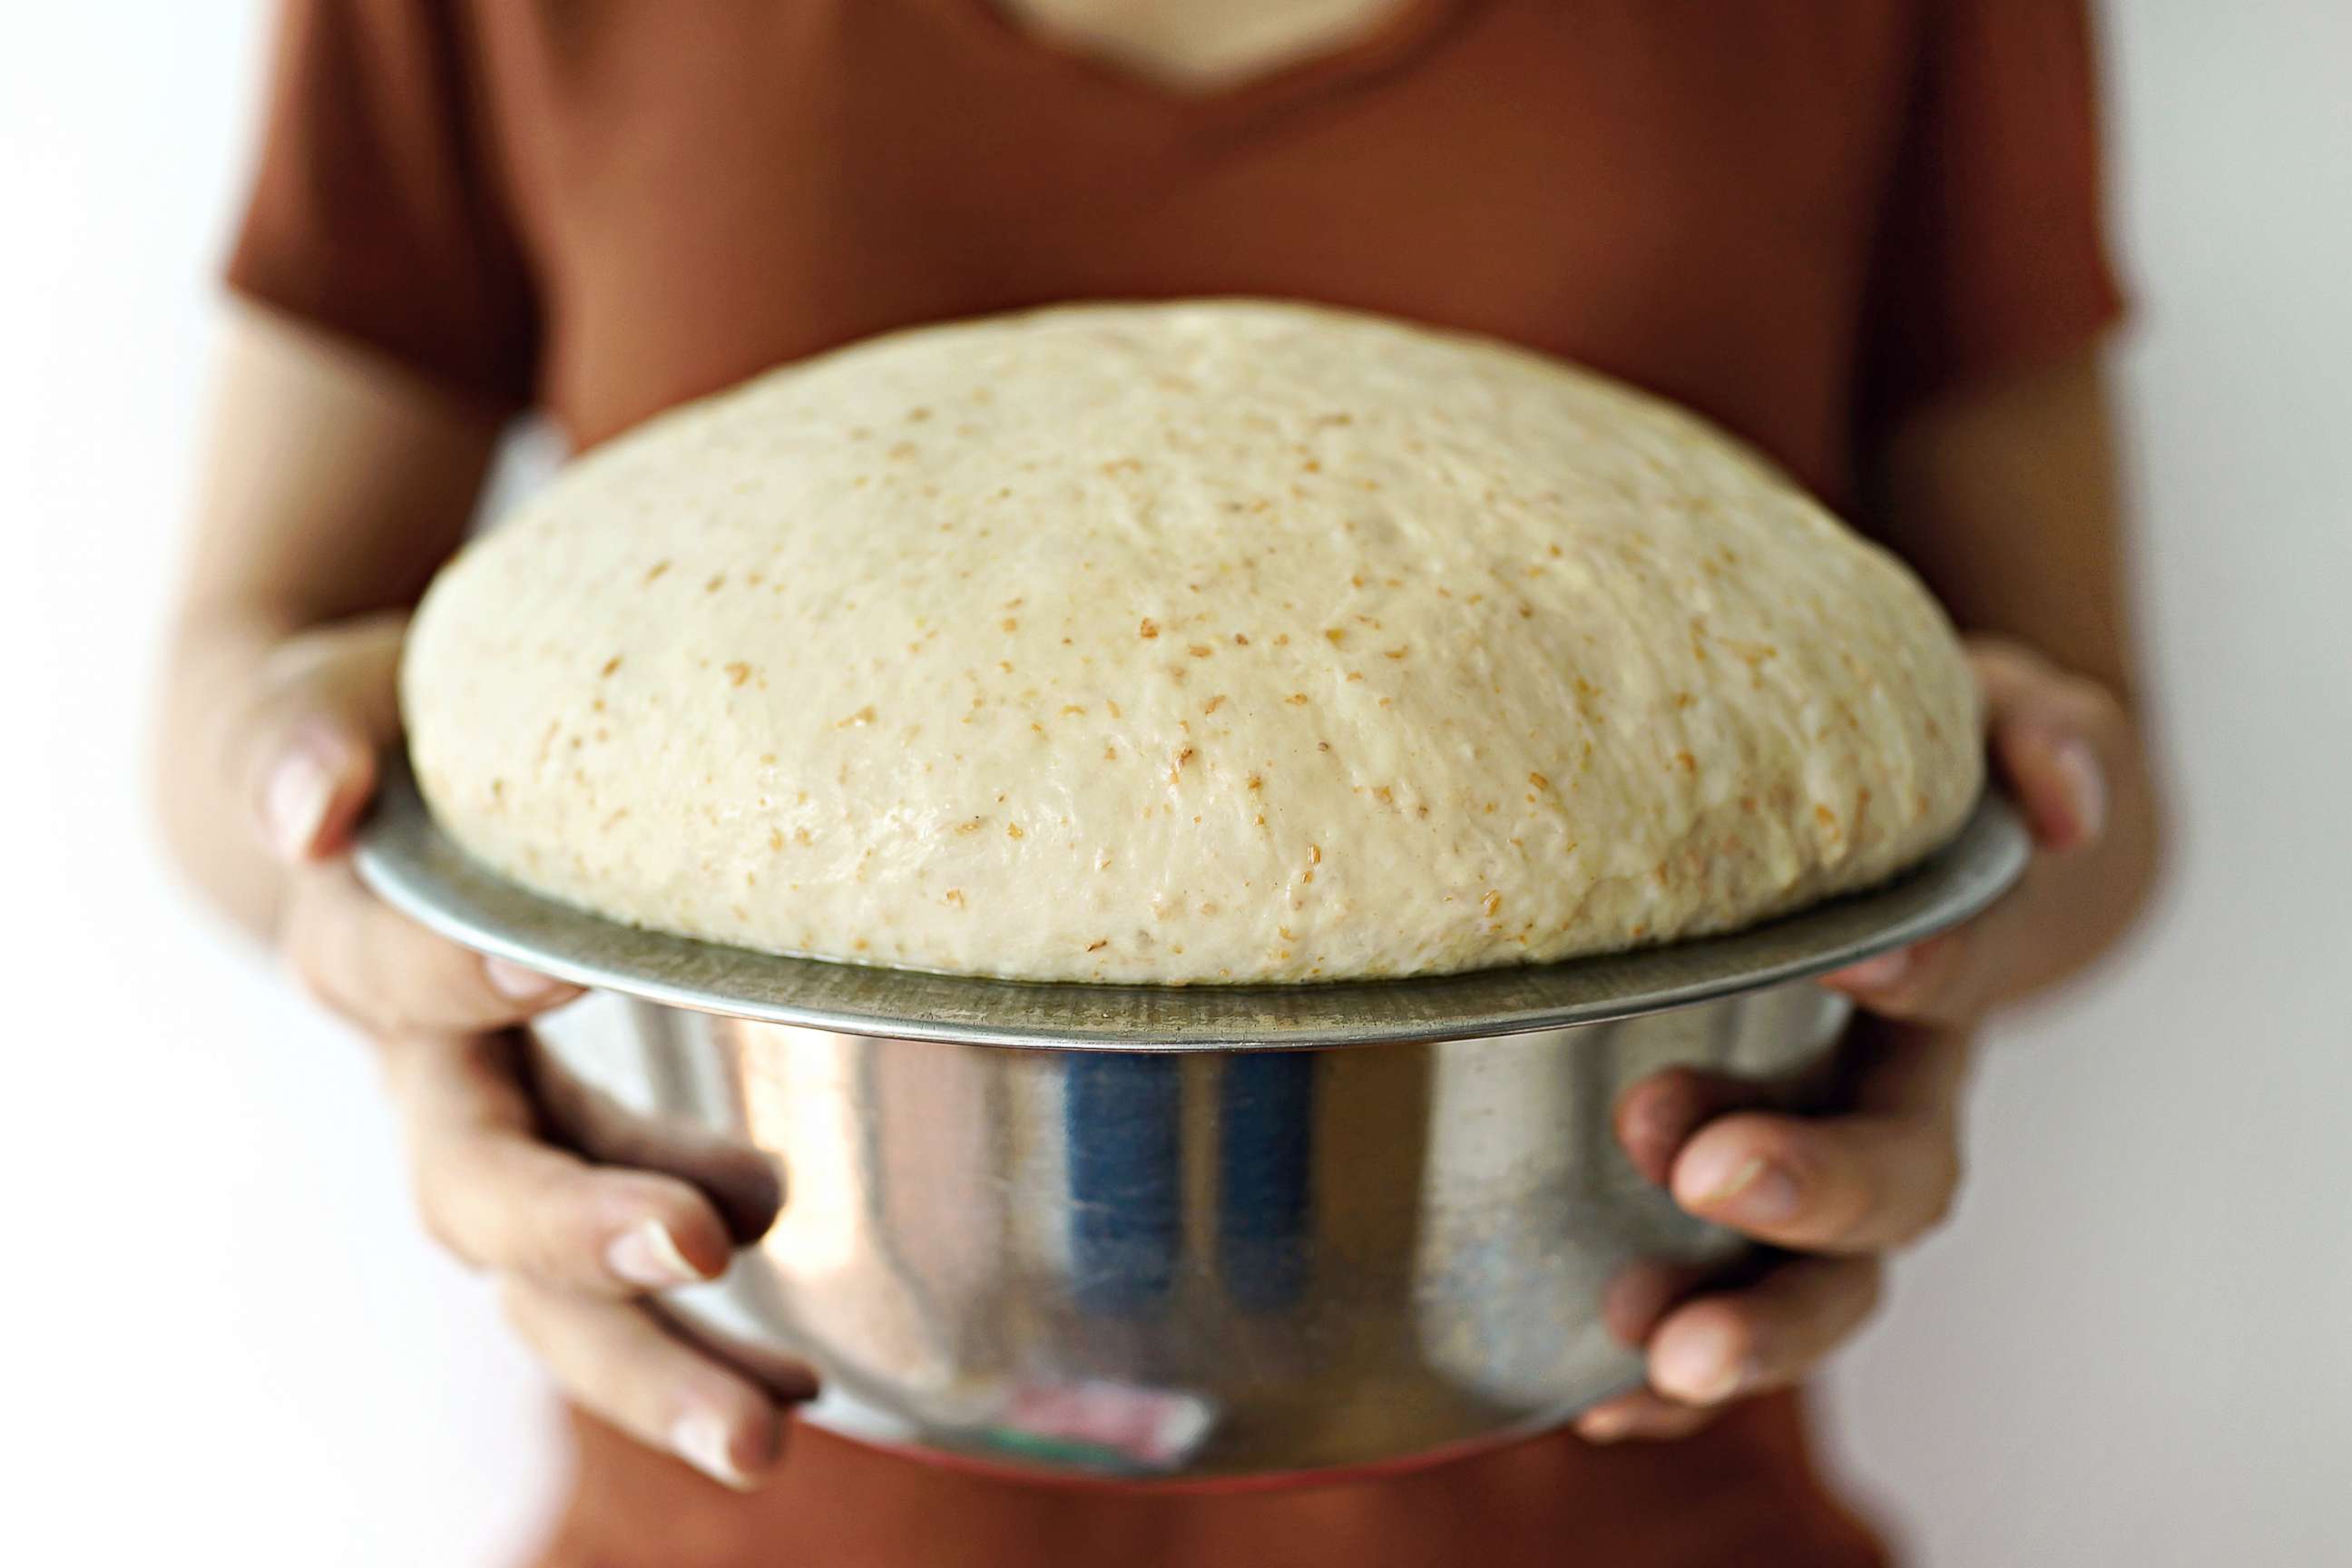 PHOTO: In this undated file photo, a person holds a bowl of risen bread dough.